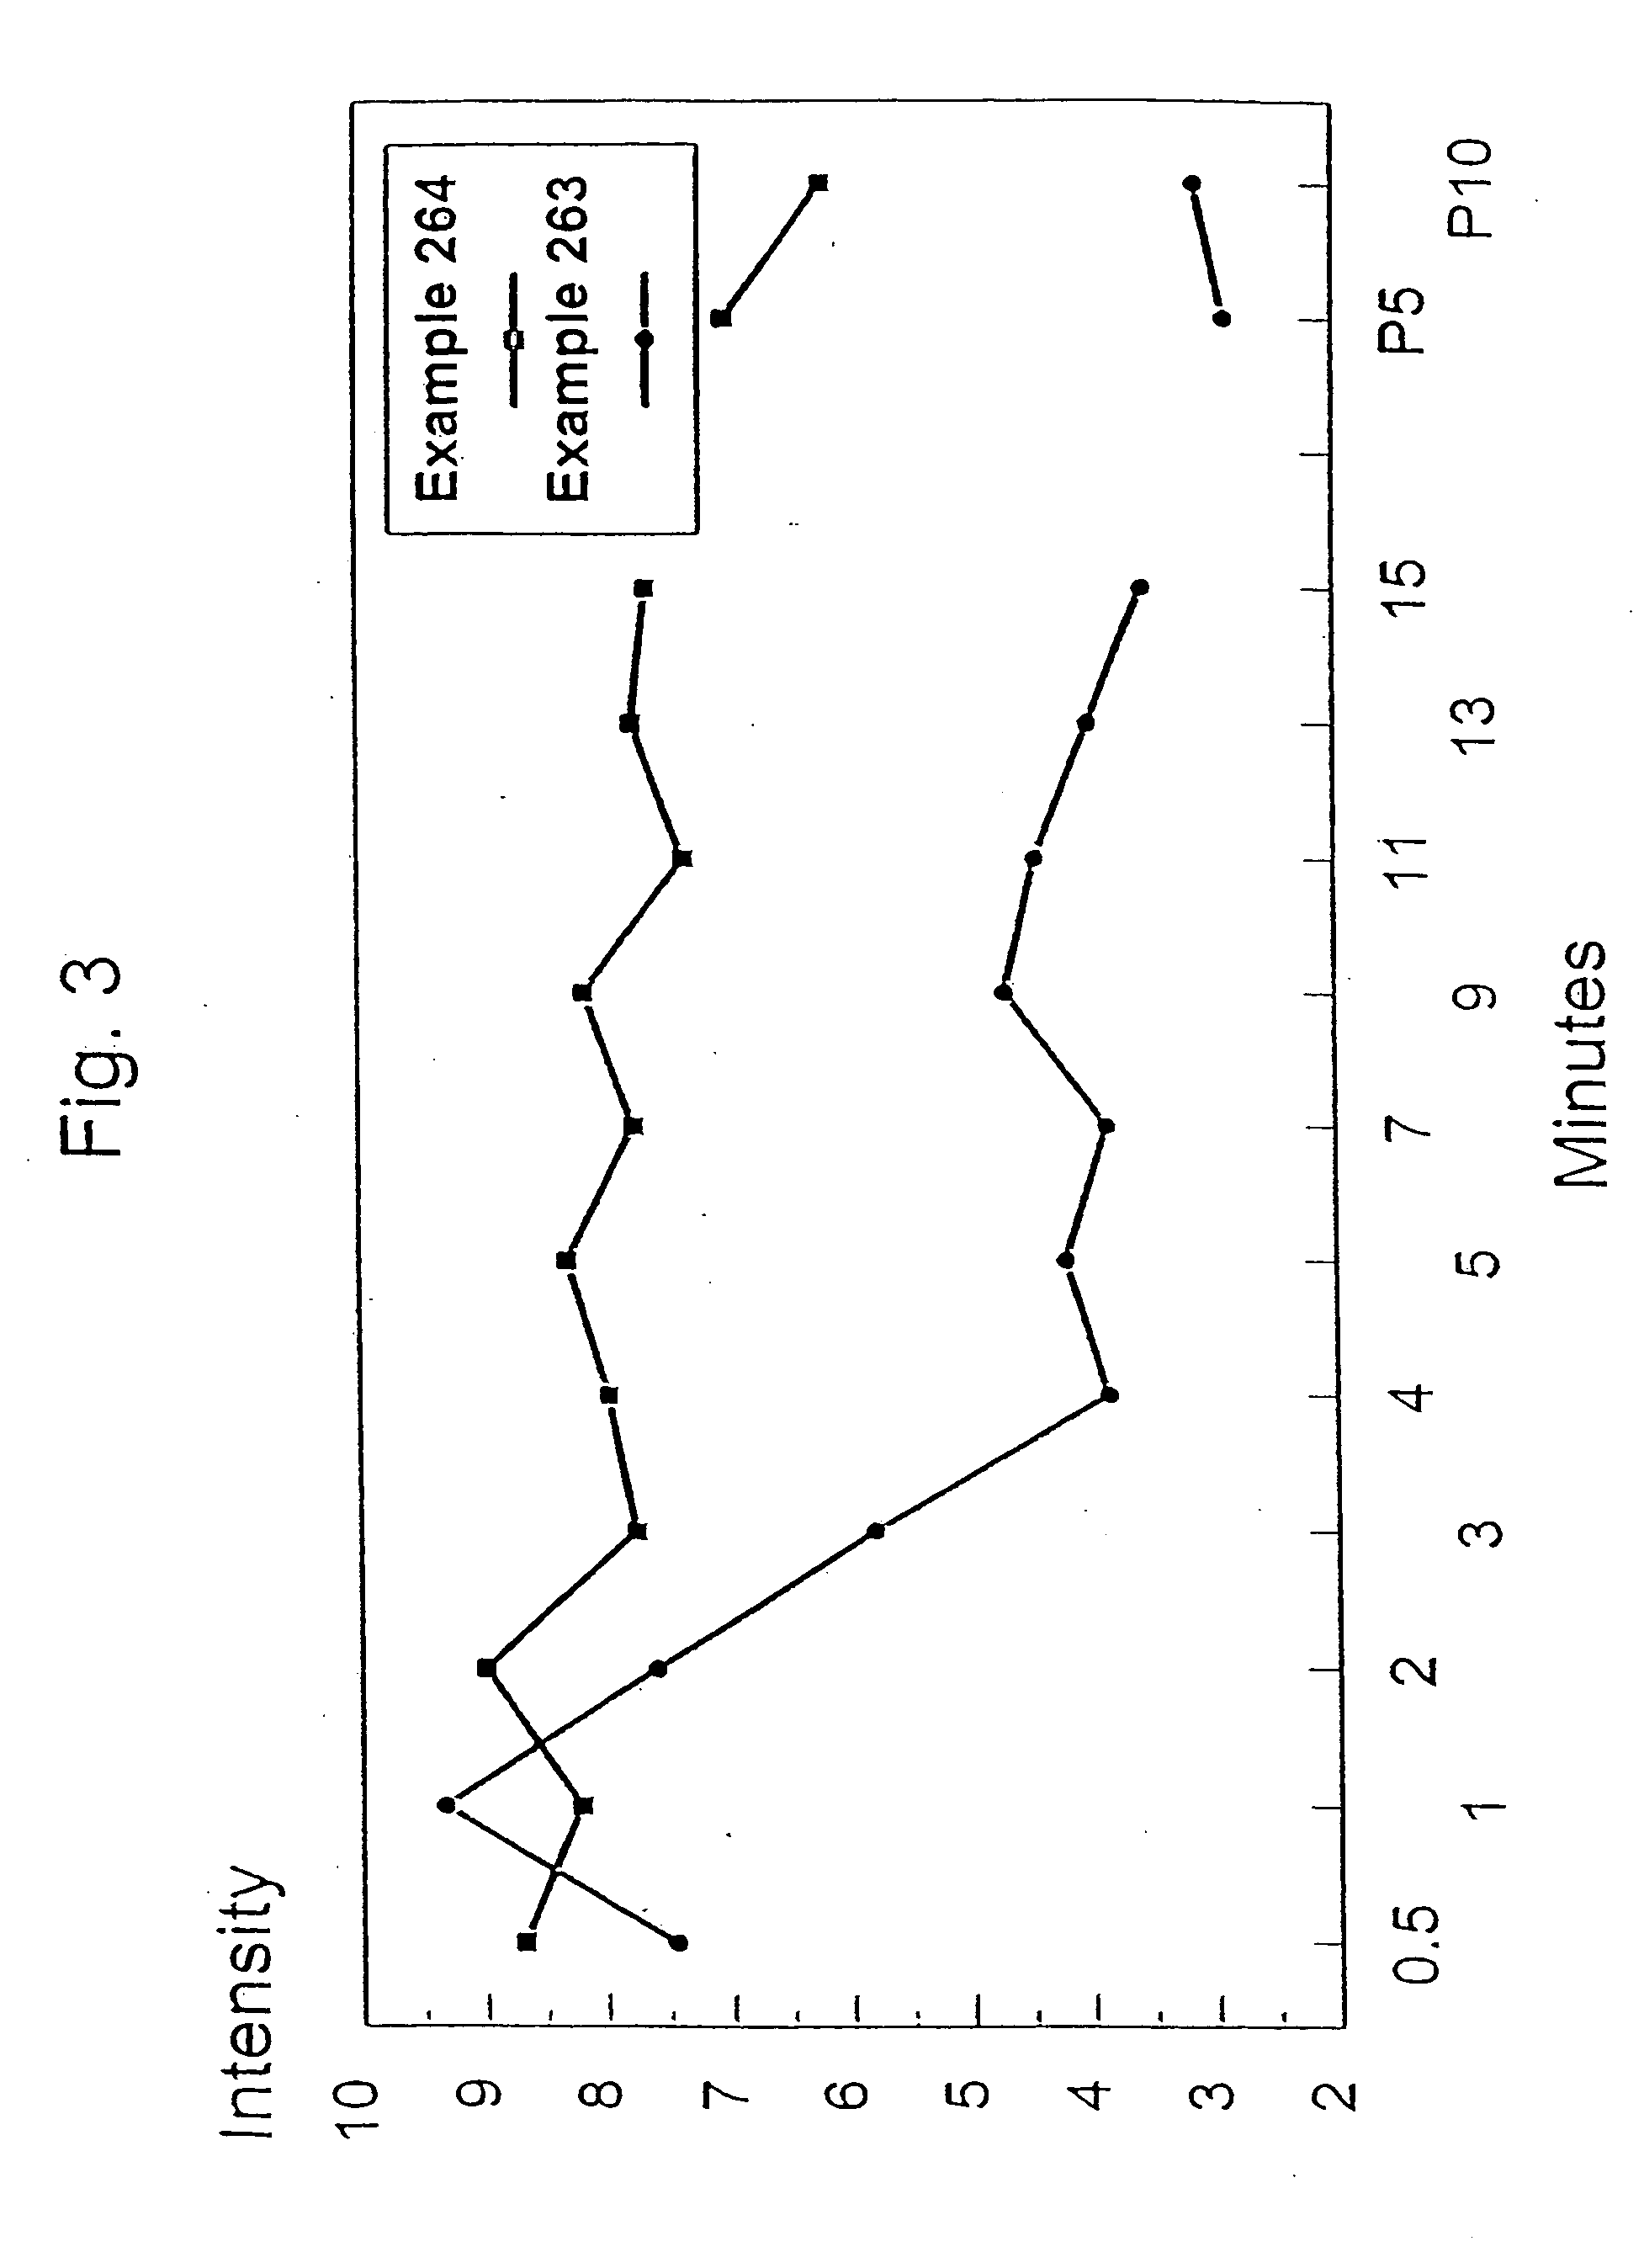 Chewing gum containing physiological cooling agents